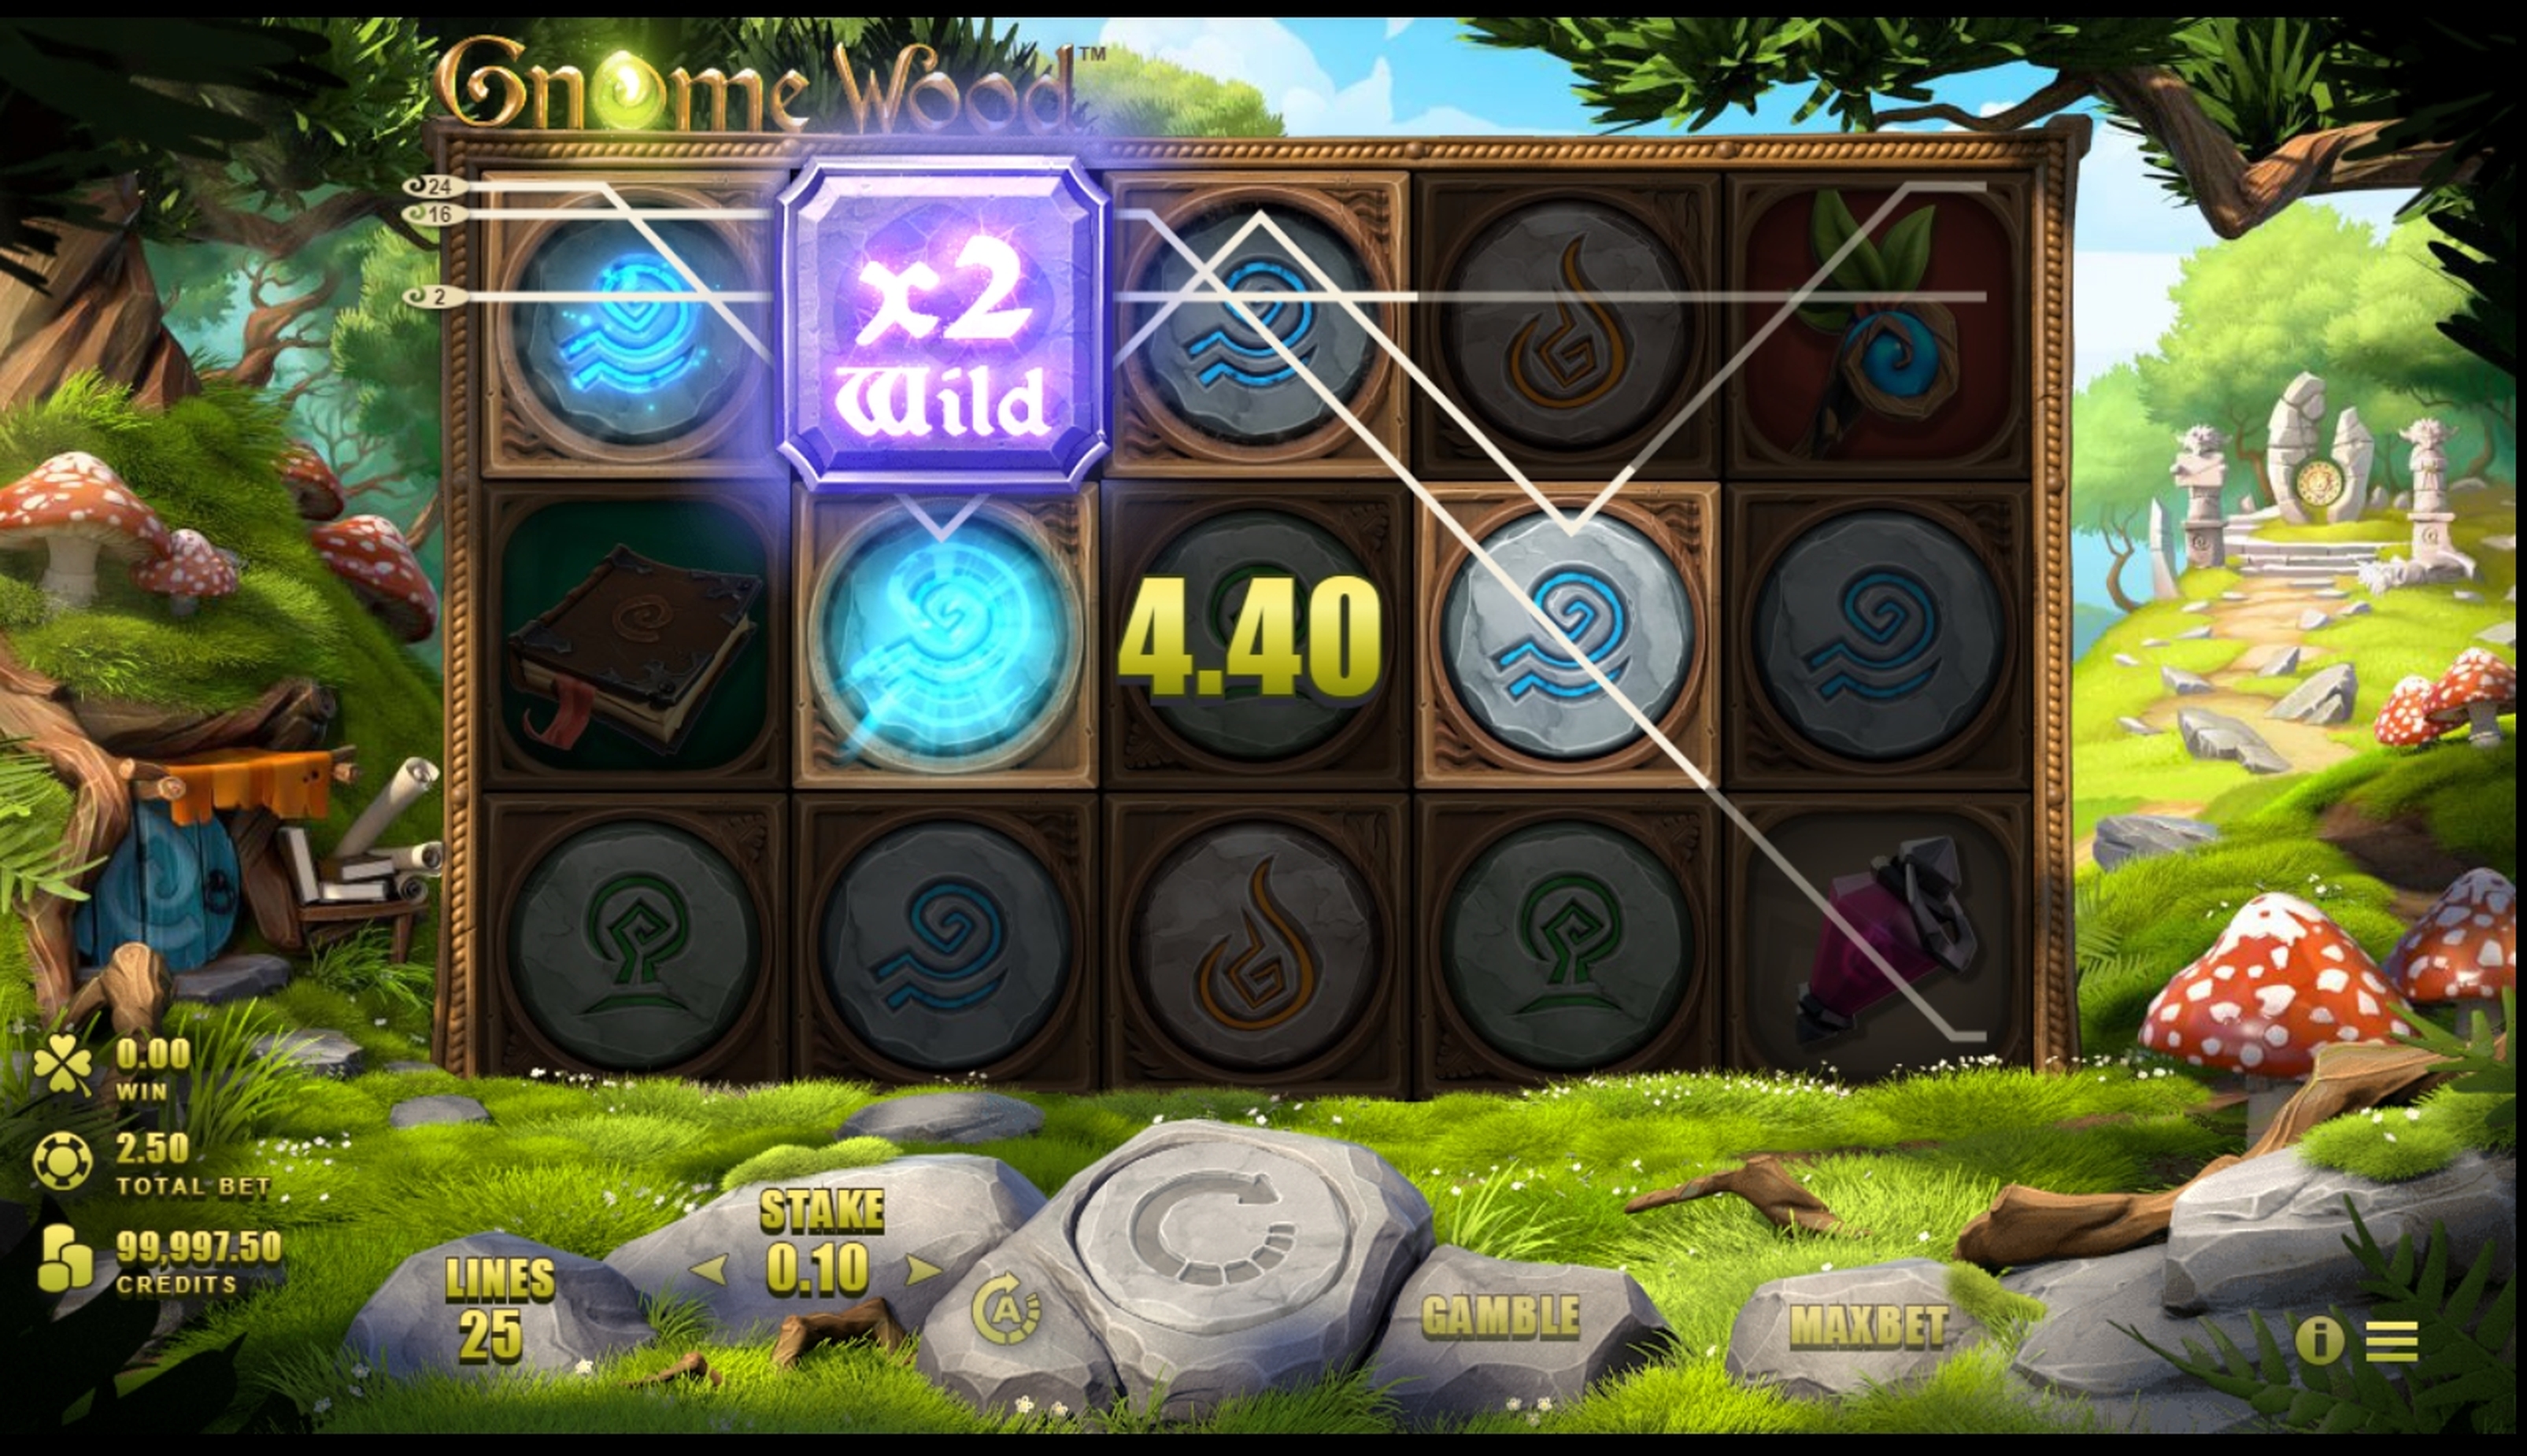 Win Money in Gnome Wood Free Slot Game by Rabcat